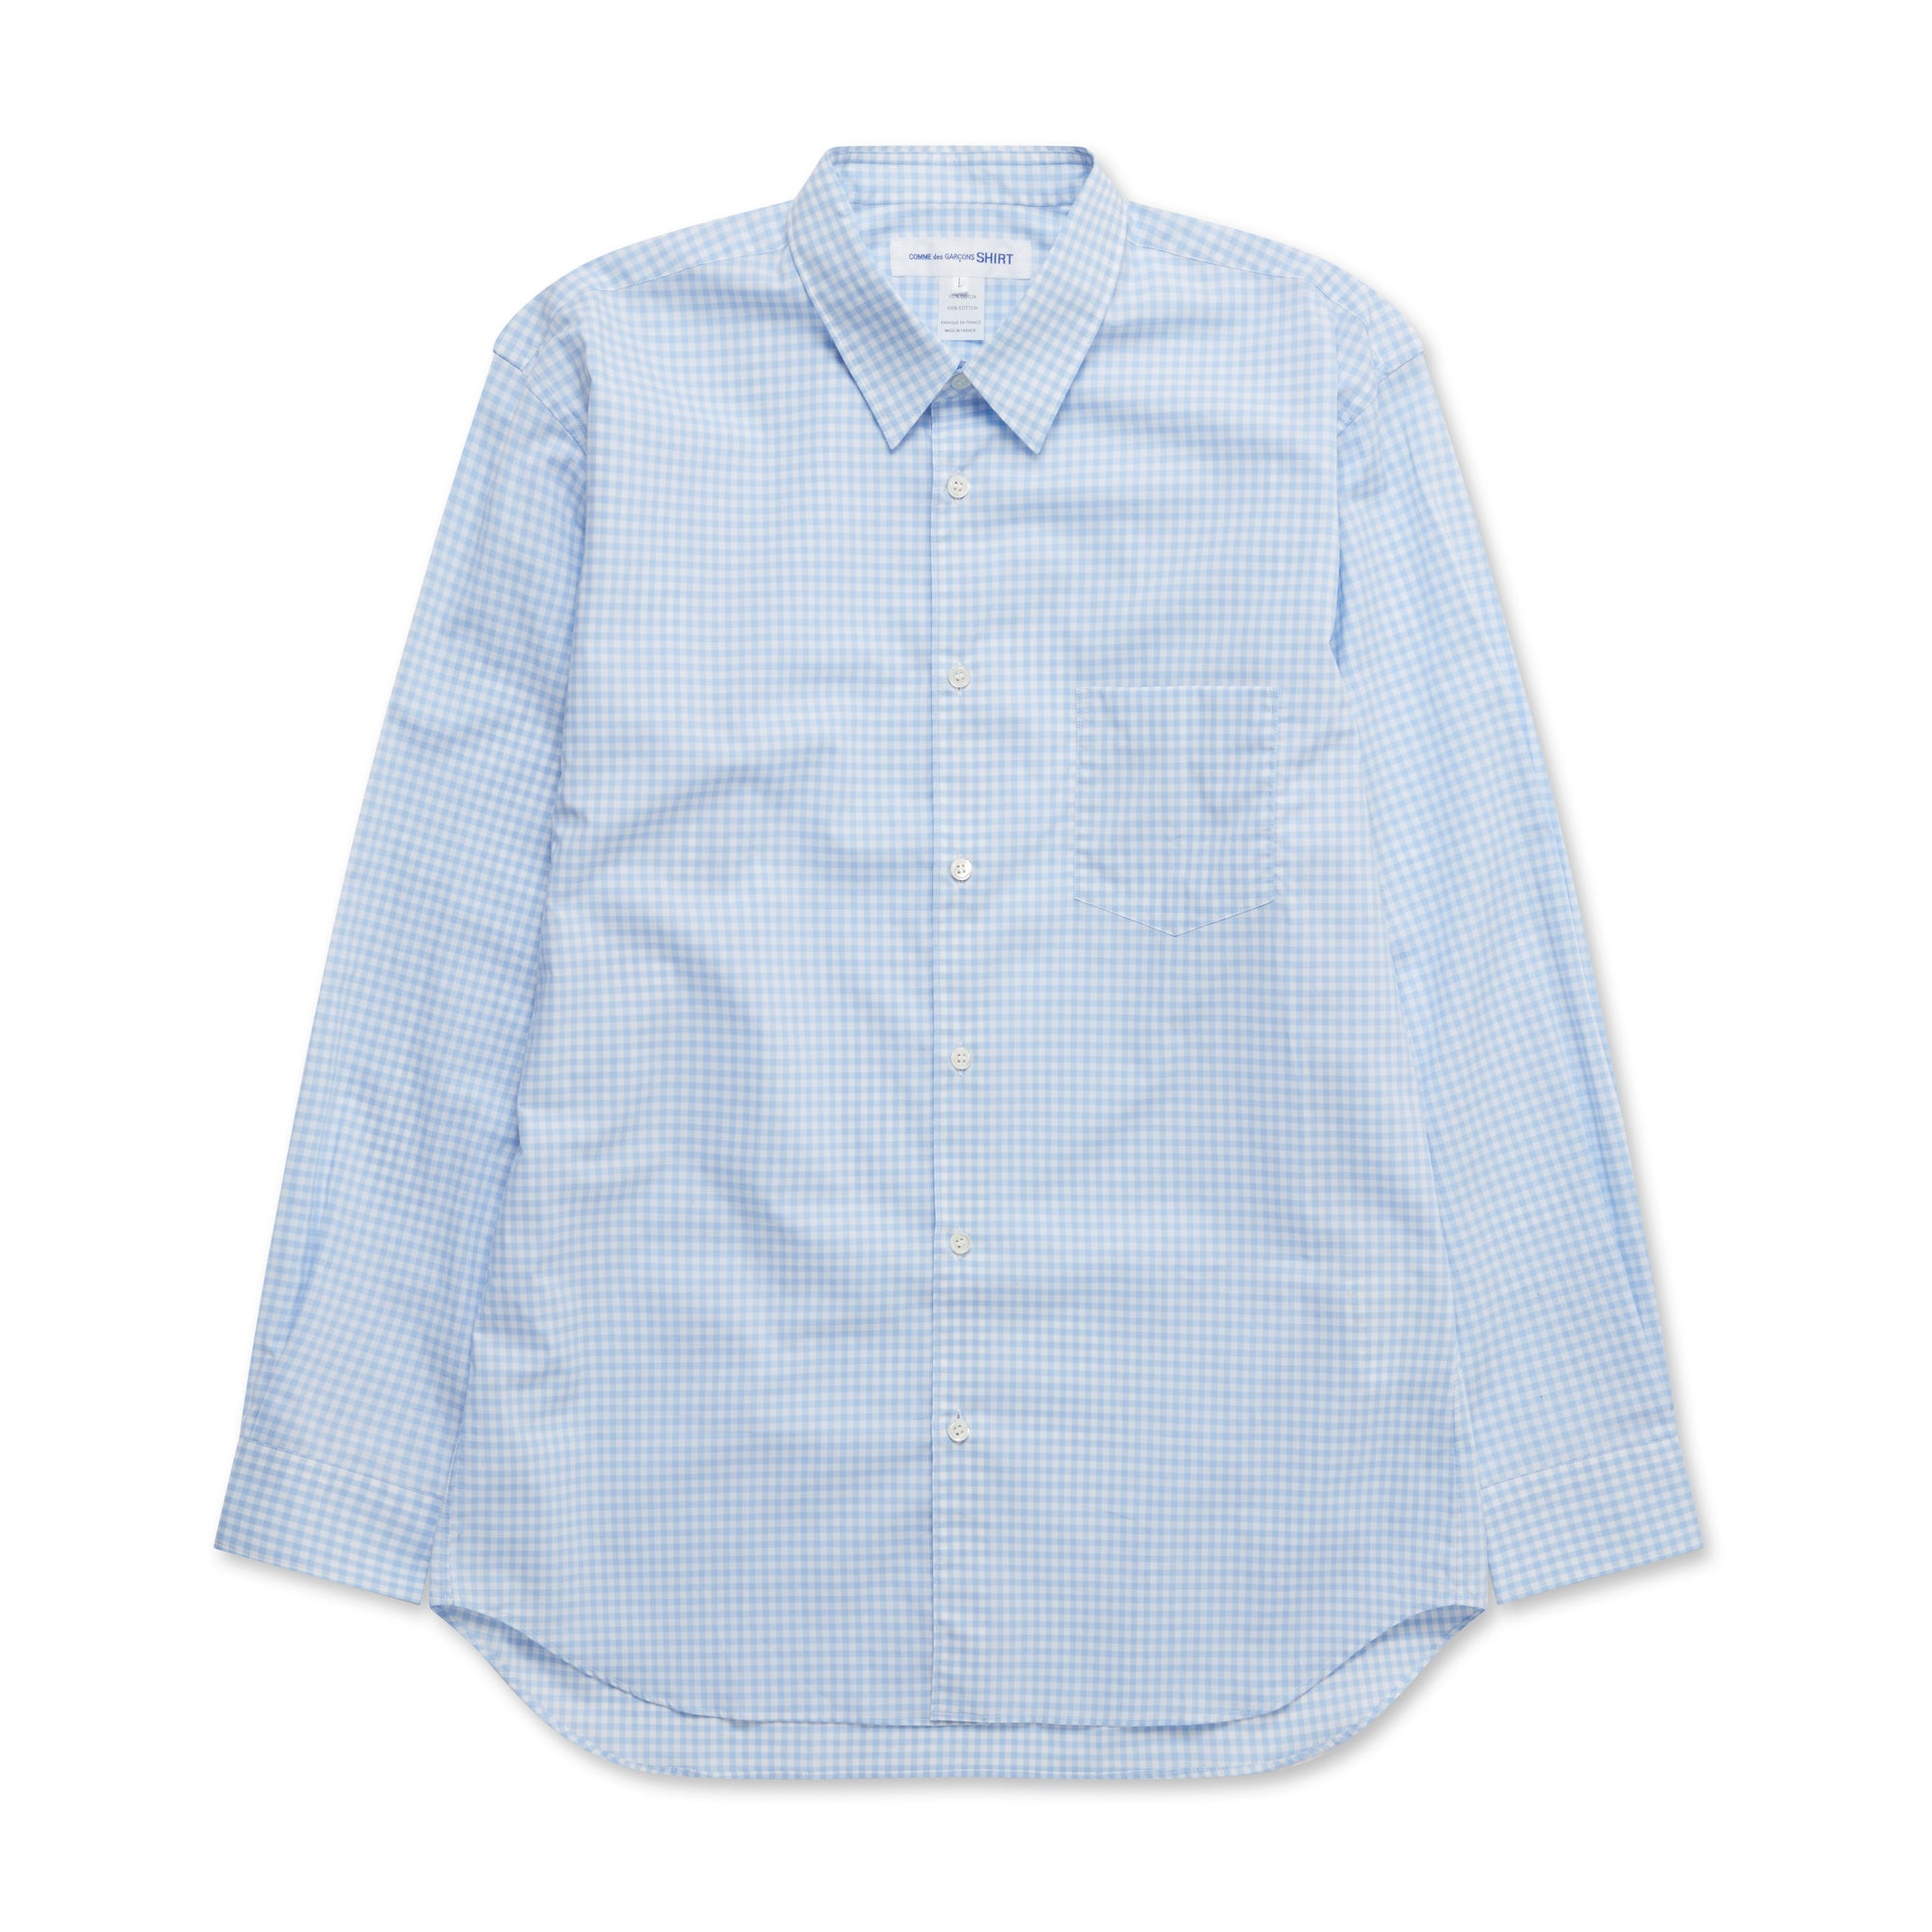 CDG Shirt Forever - Classic Fit Checked Shirt - (Blue) view 1